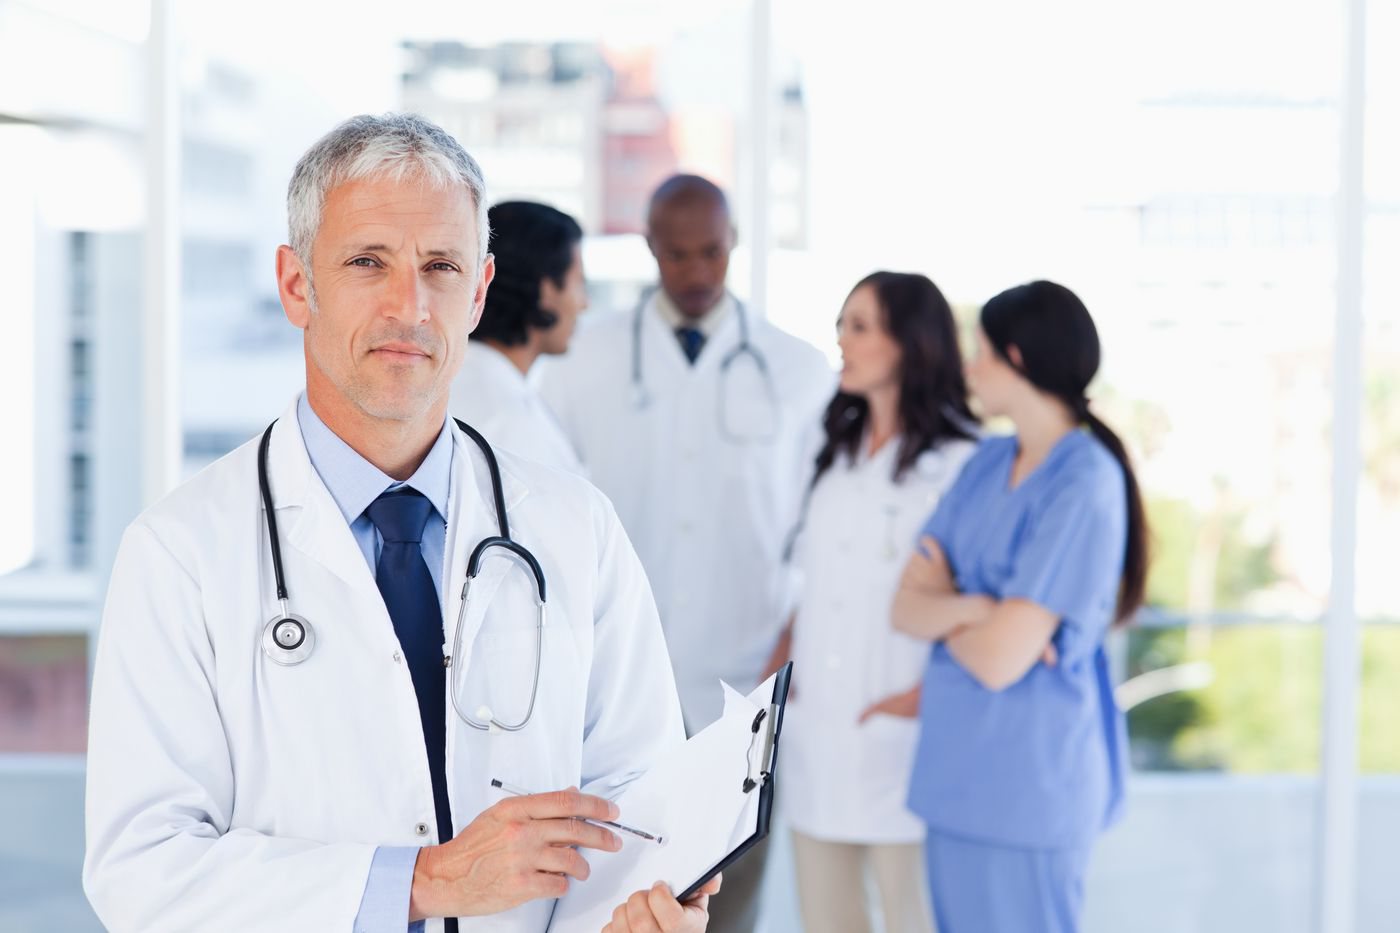 What Is Medical Credentialing, and Why Is it Important?